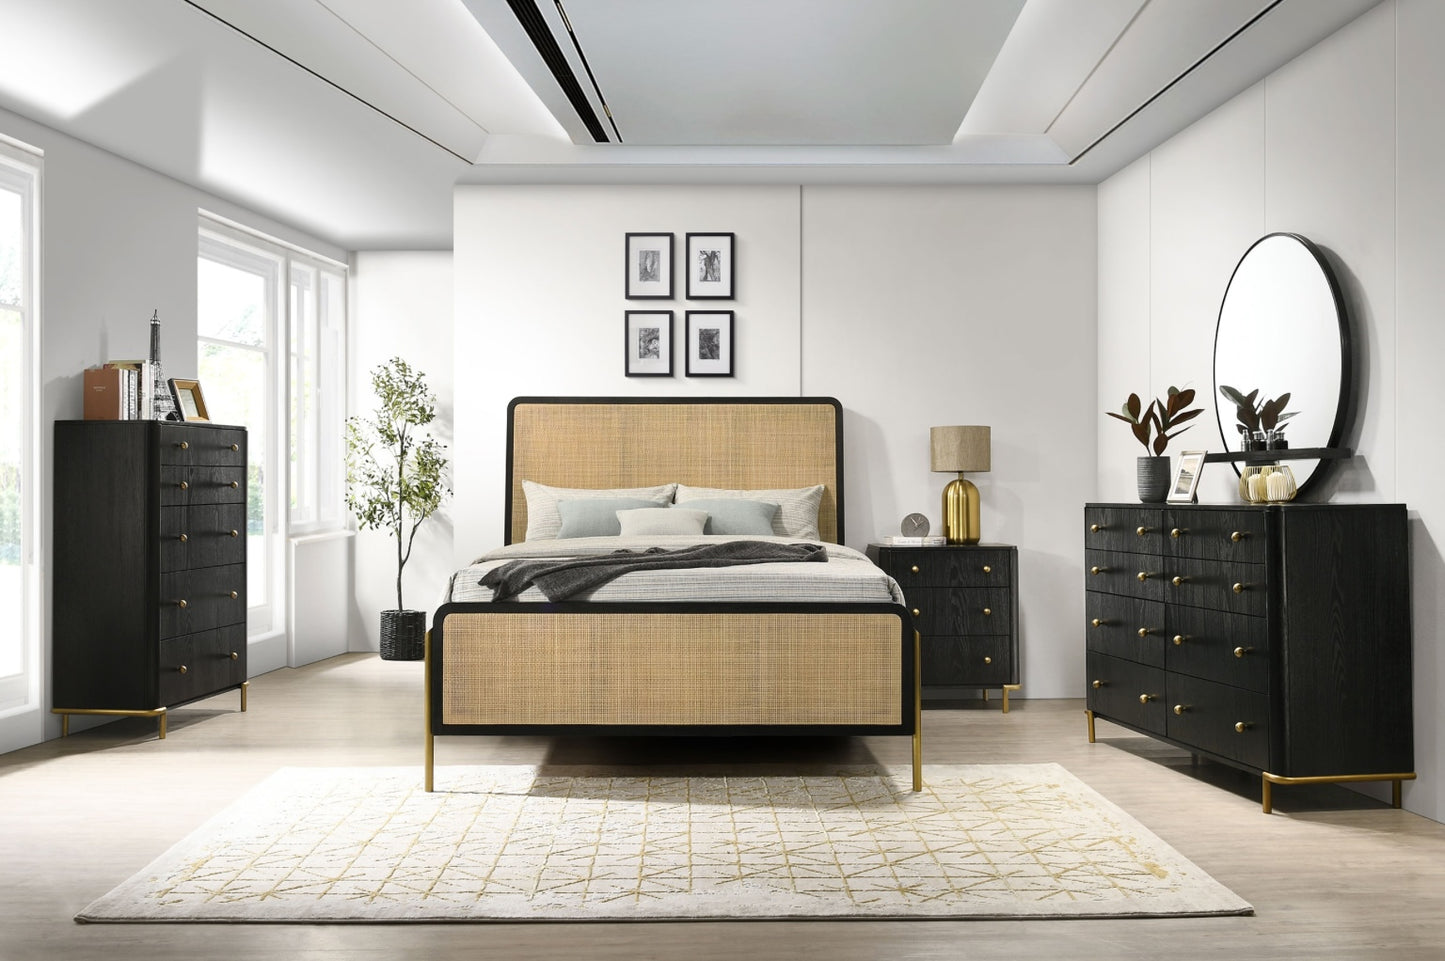 Arini Queen Bedroom Set With Woven Rattan Headboard Black And Natural